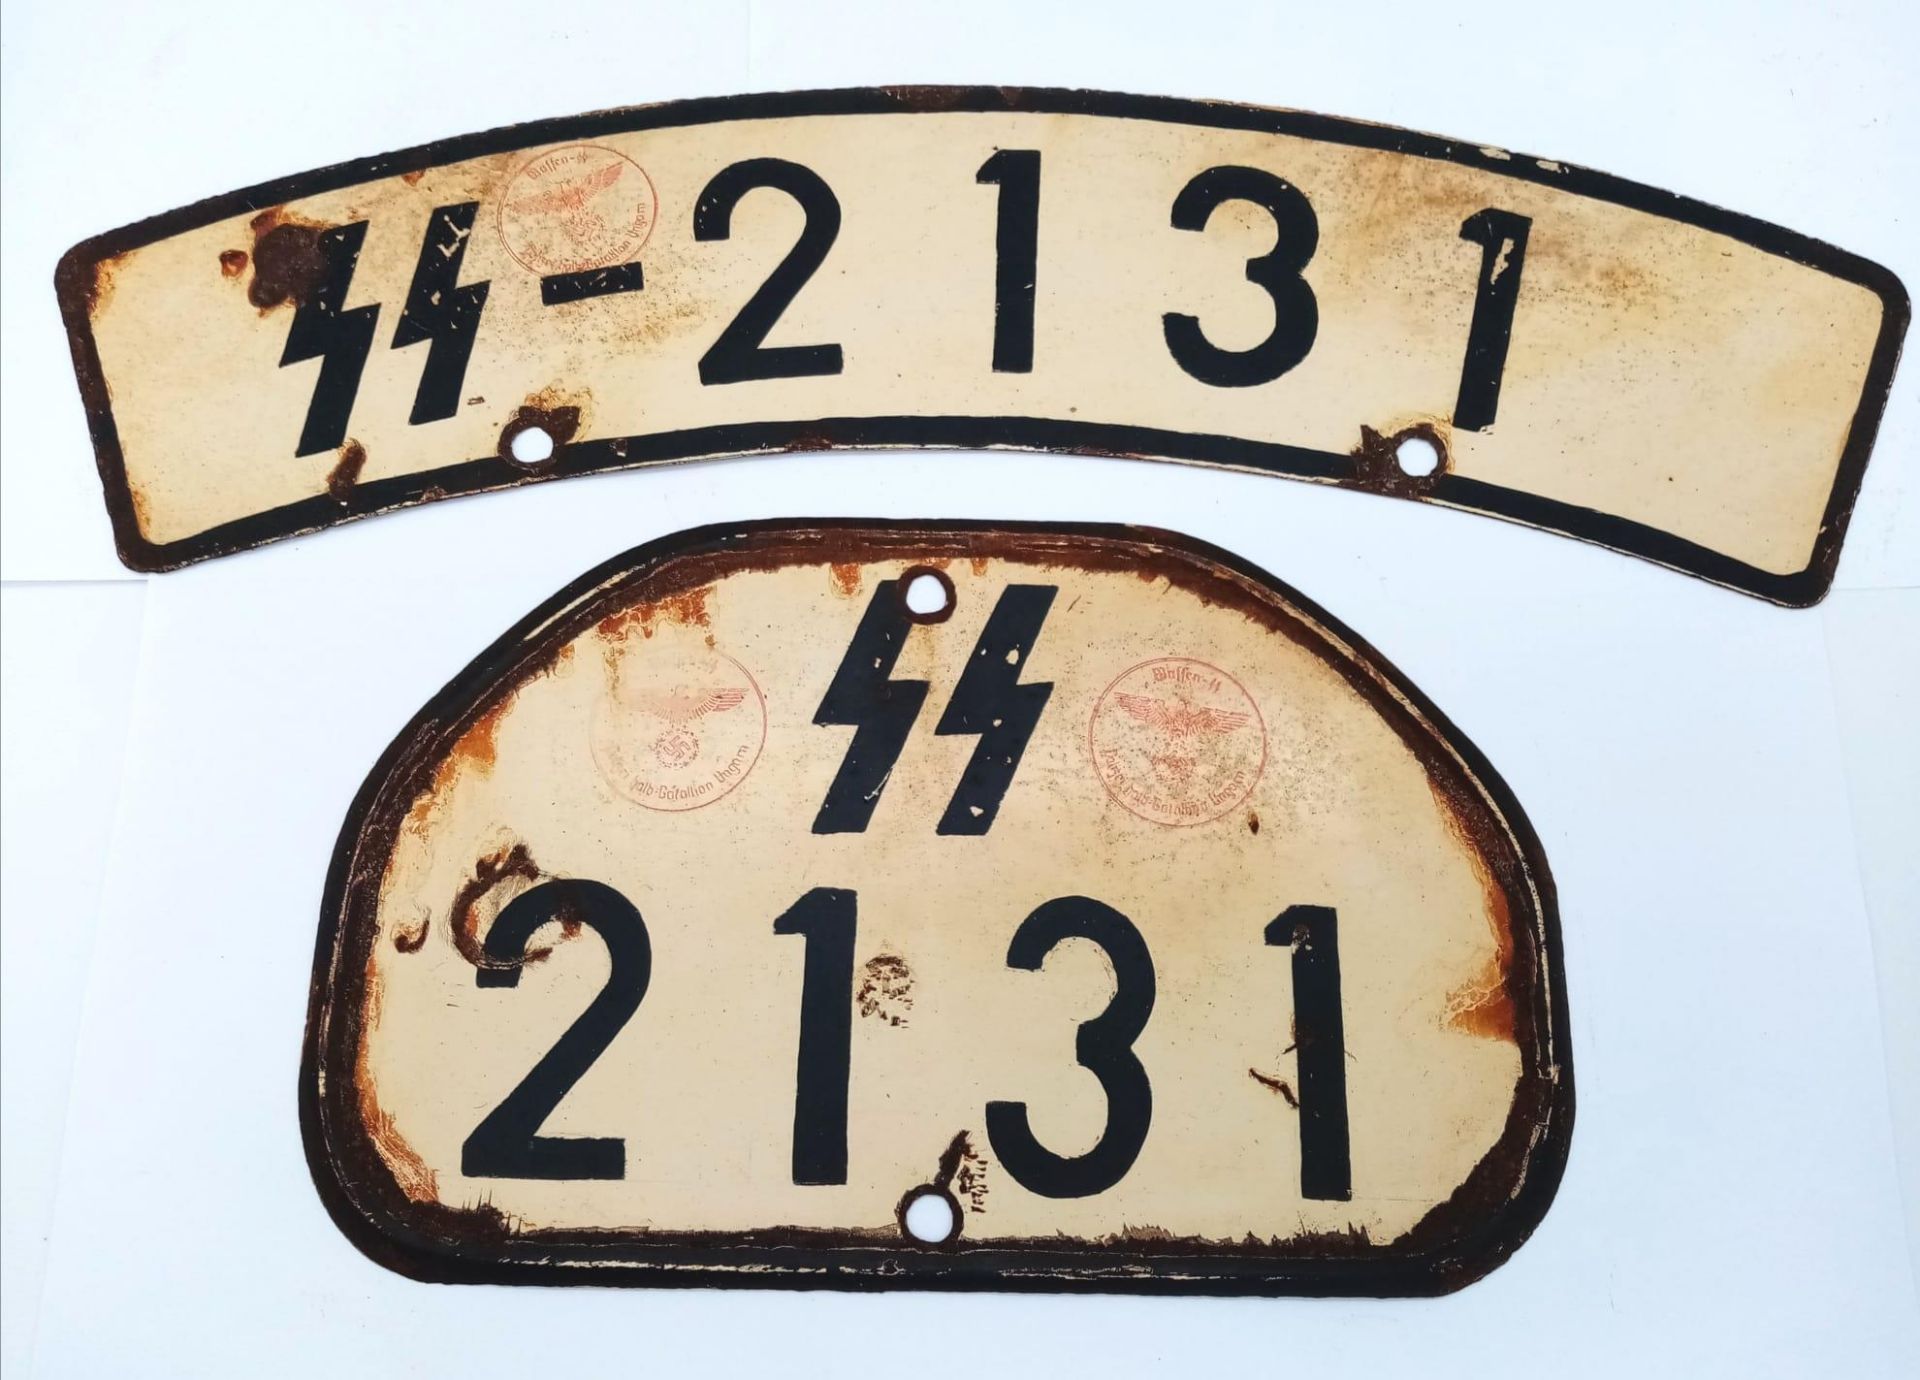 3rd Reich Waffen SS Number Plates from a motorcycle